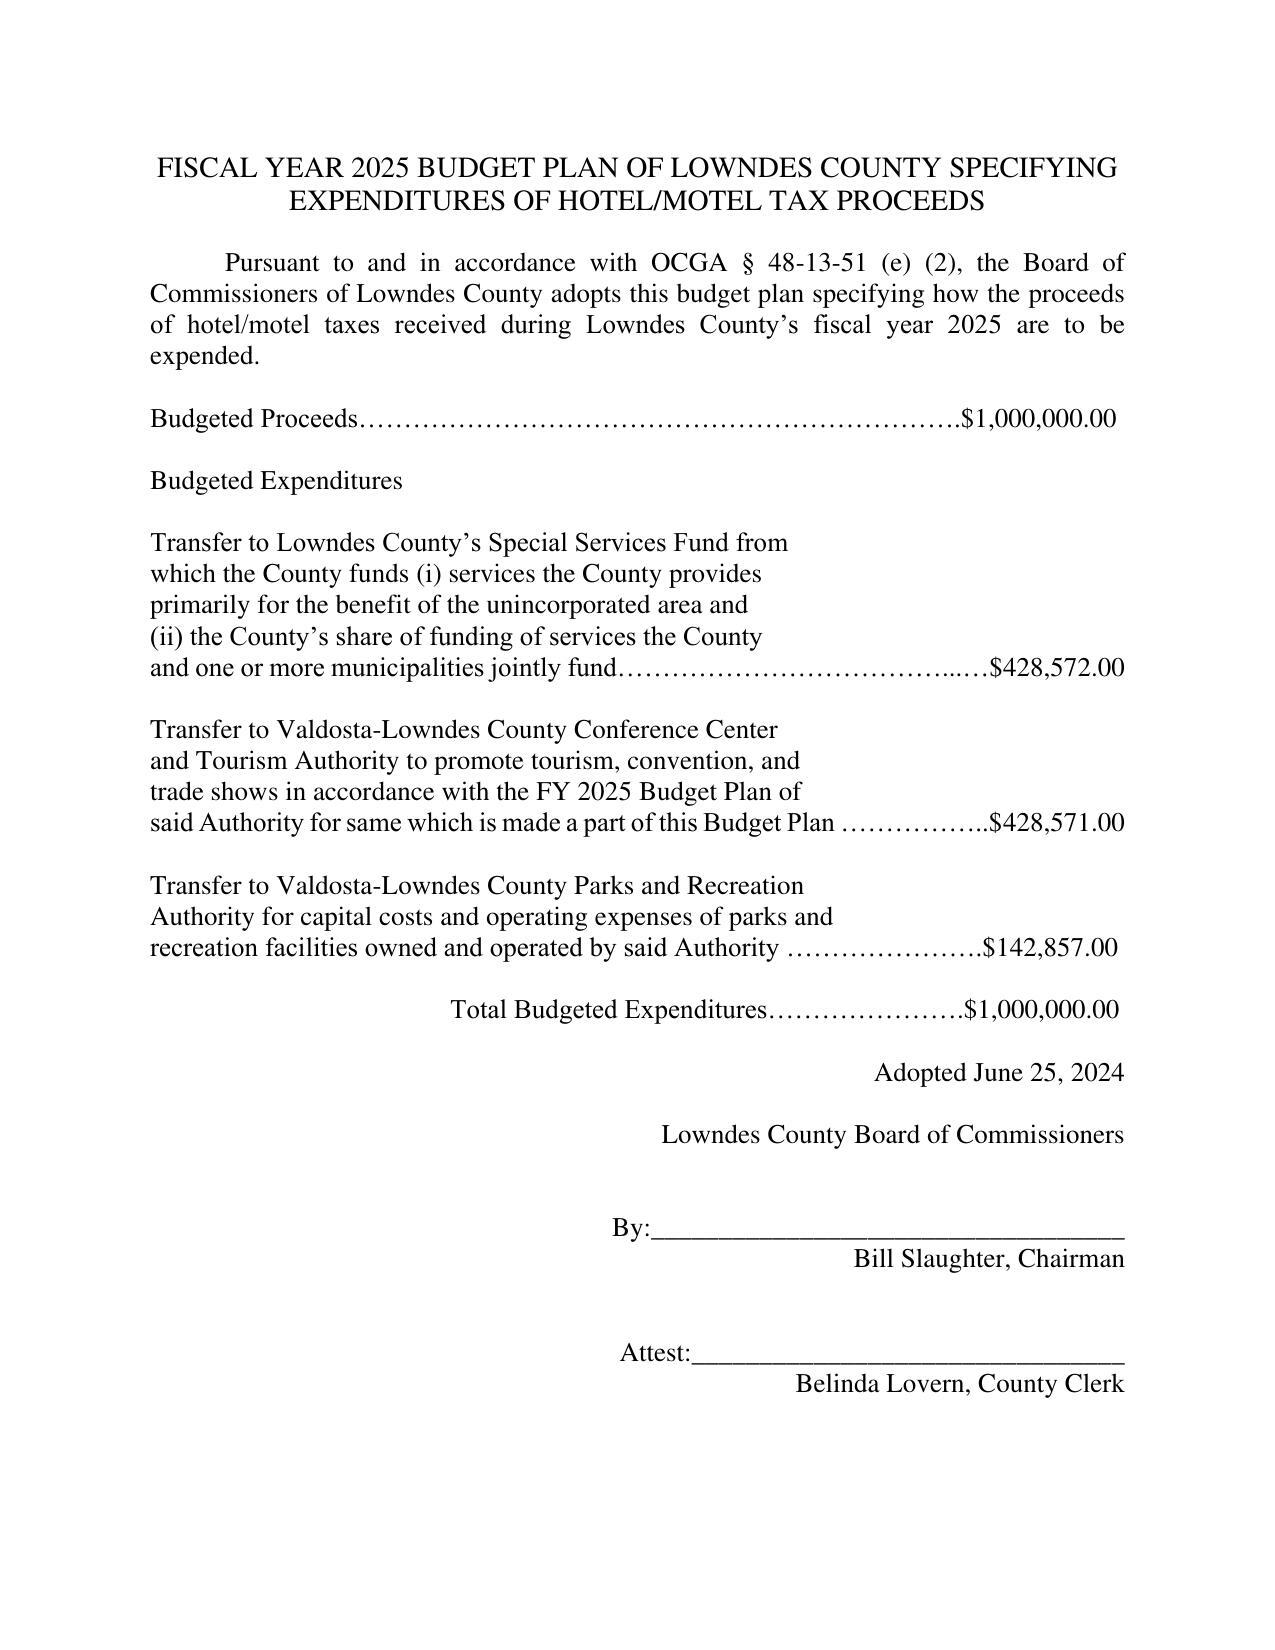 FISCAL YEAR 2025 BUDGET PLAN OF LOWNDES COUNTY SPECIFYING EXPENDITURES OF HOTEL/MOTEL TAX PROCEEDS